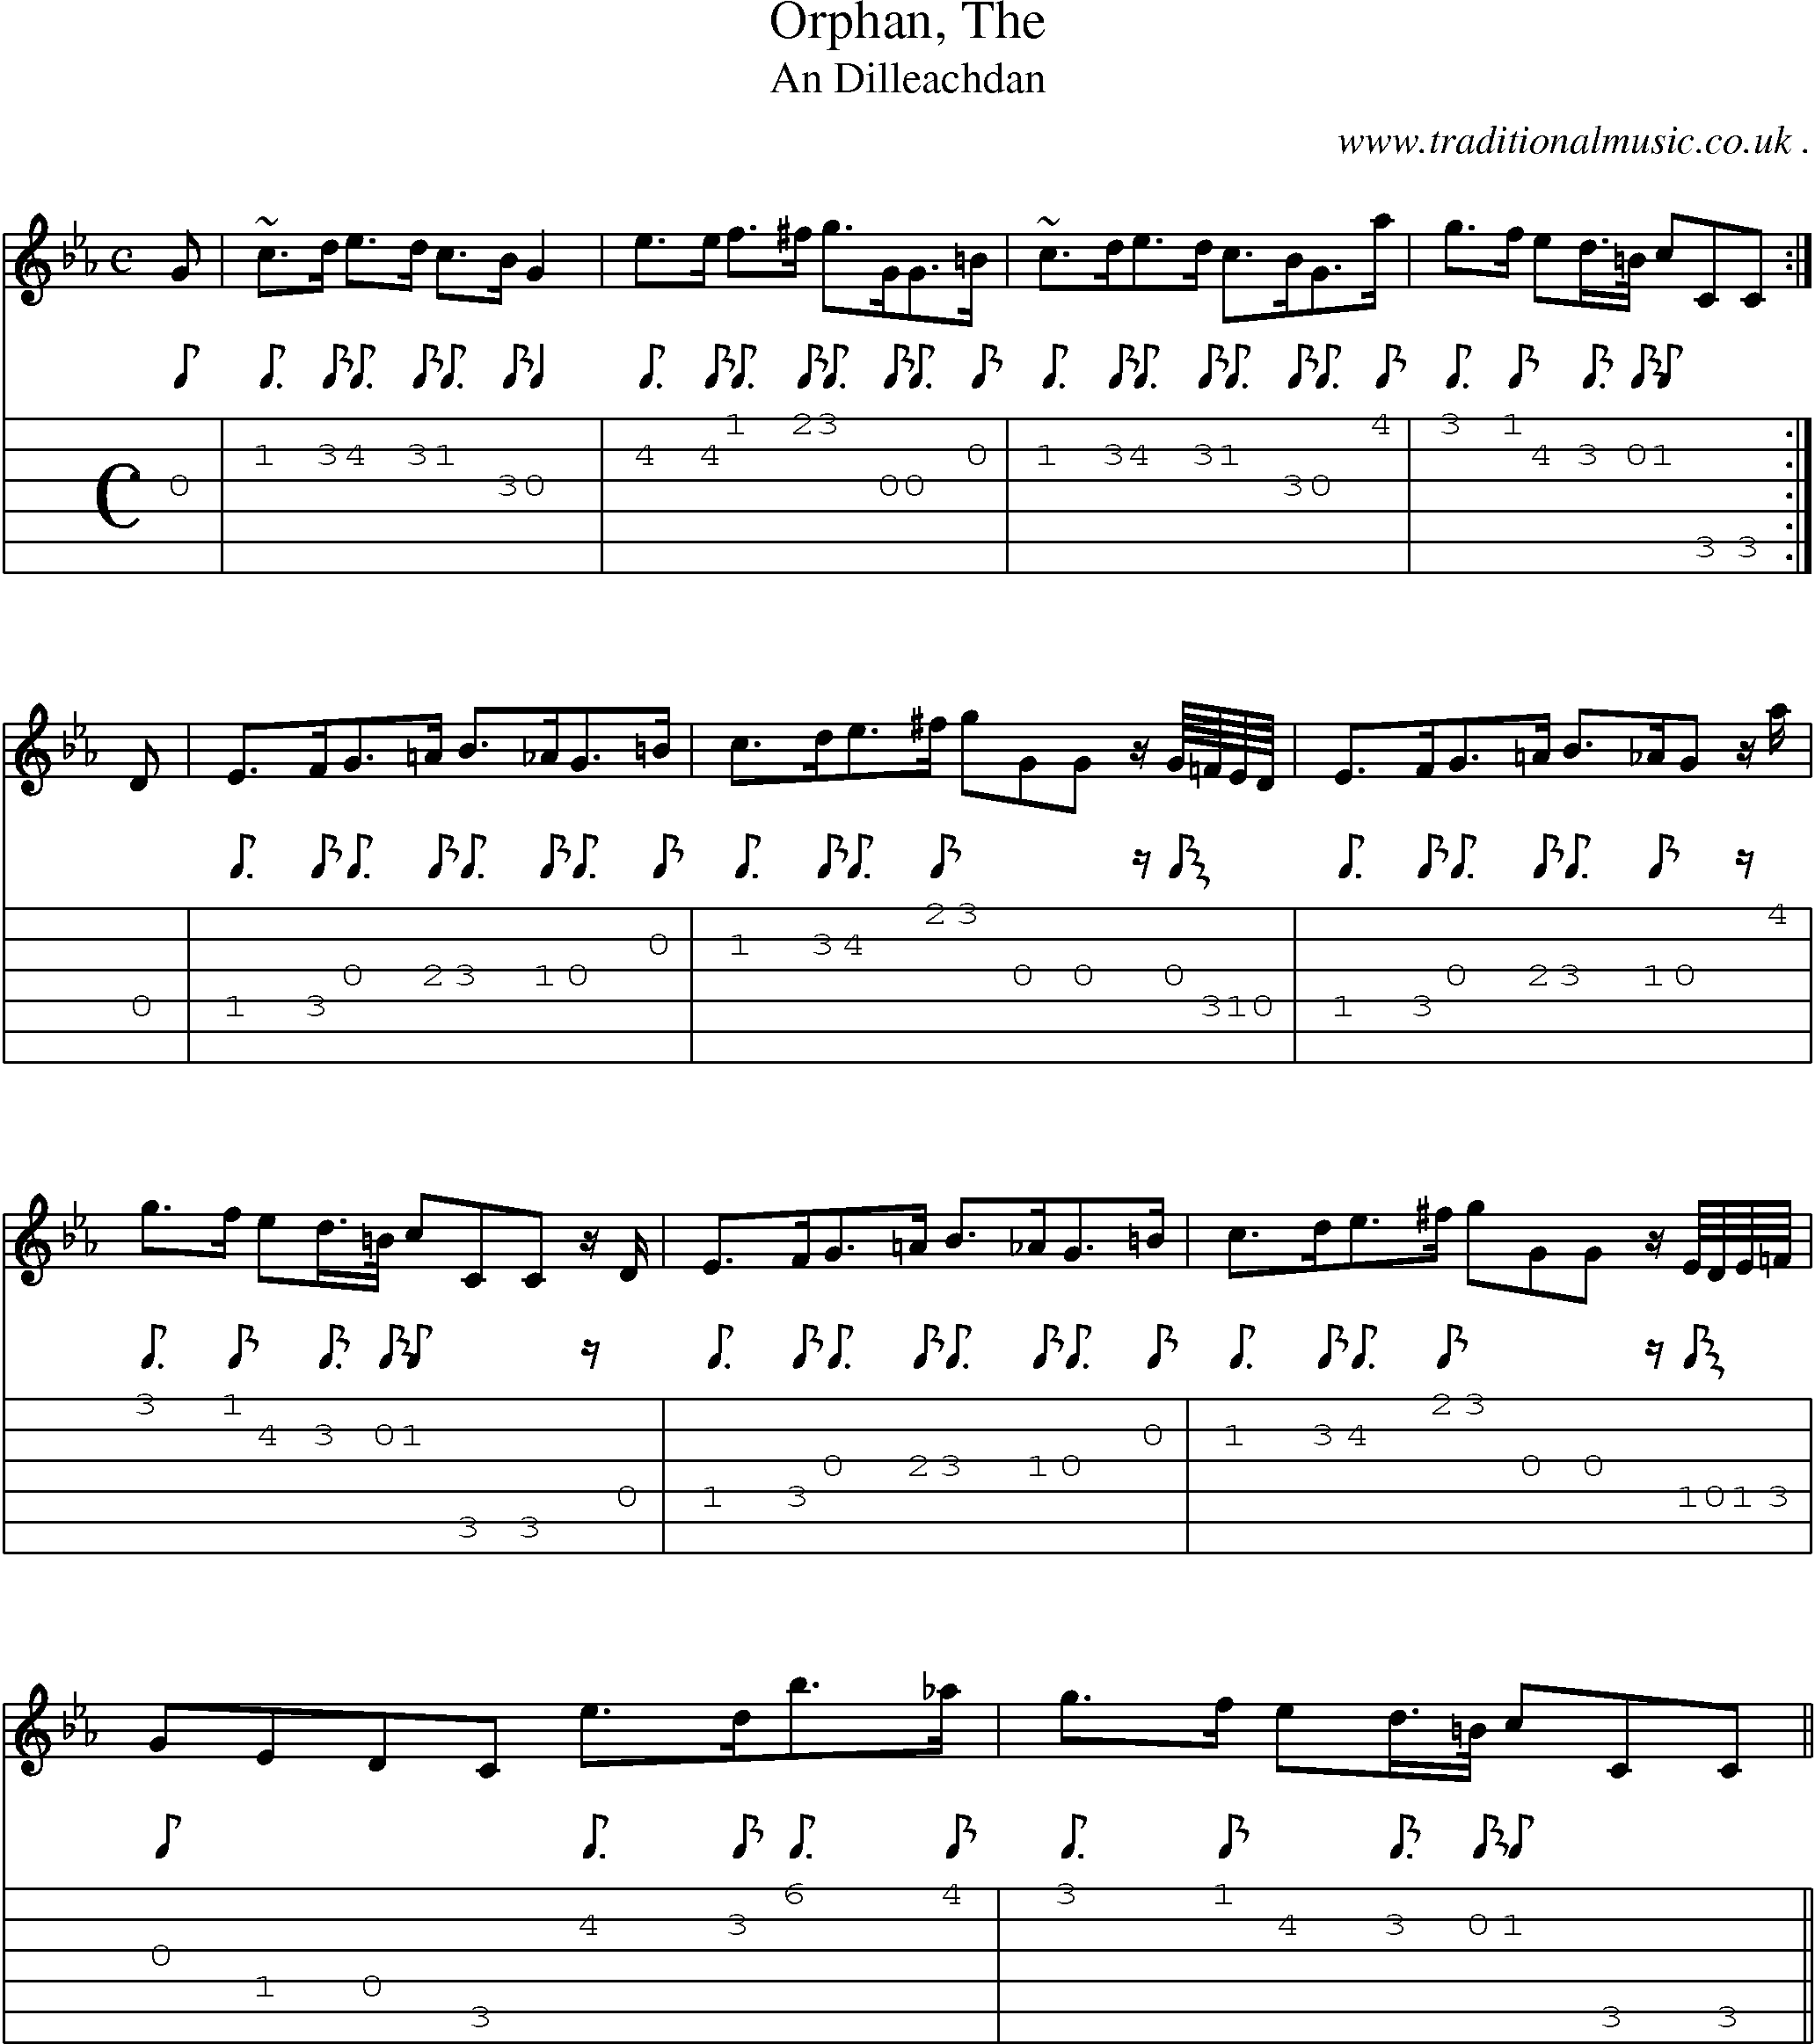 Sheet-music  score, Chords and Guitar Tabs for Orphan The 